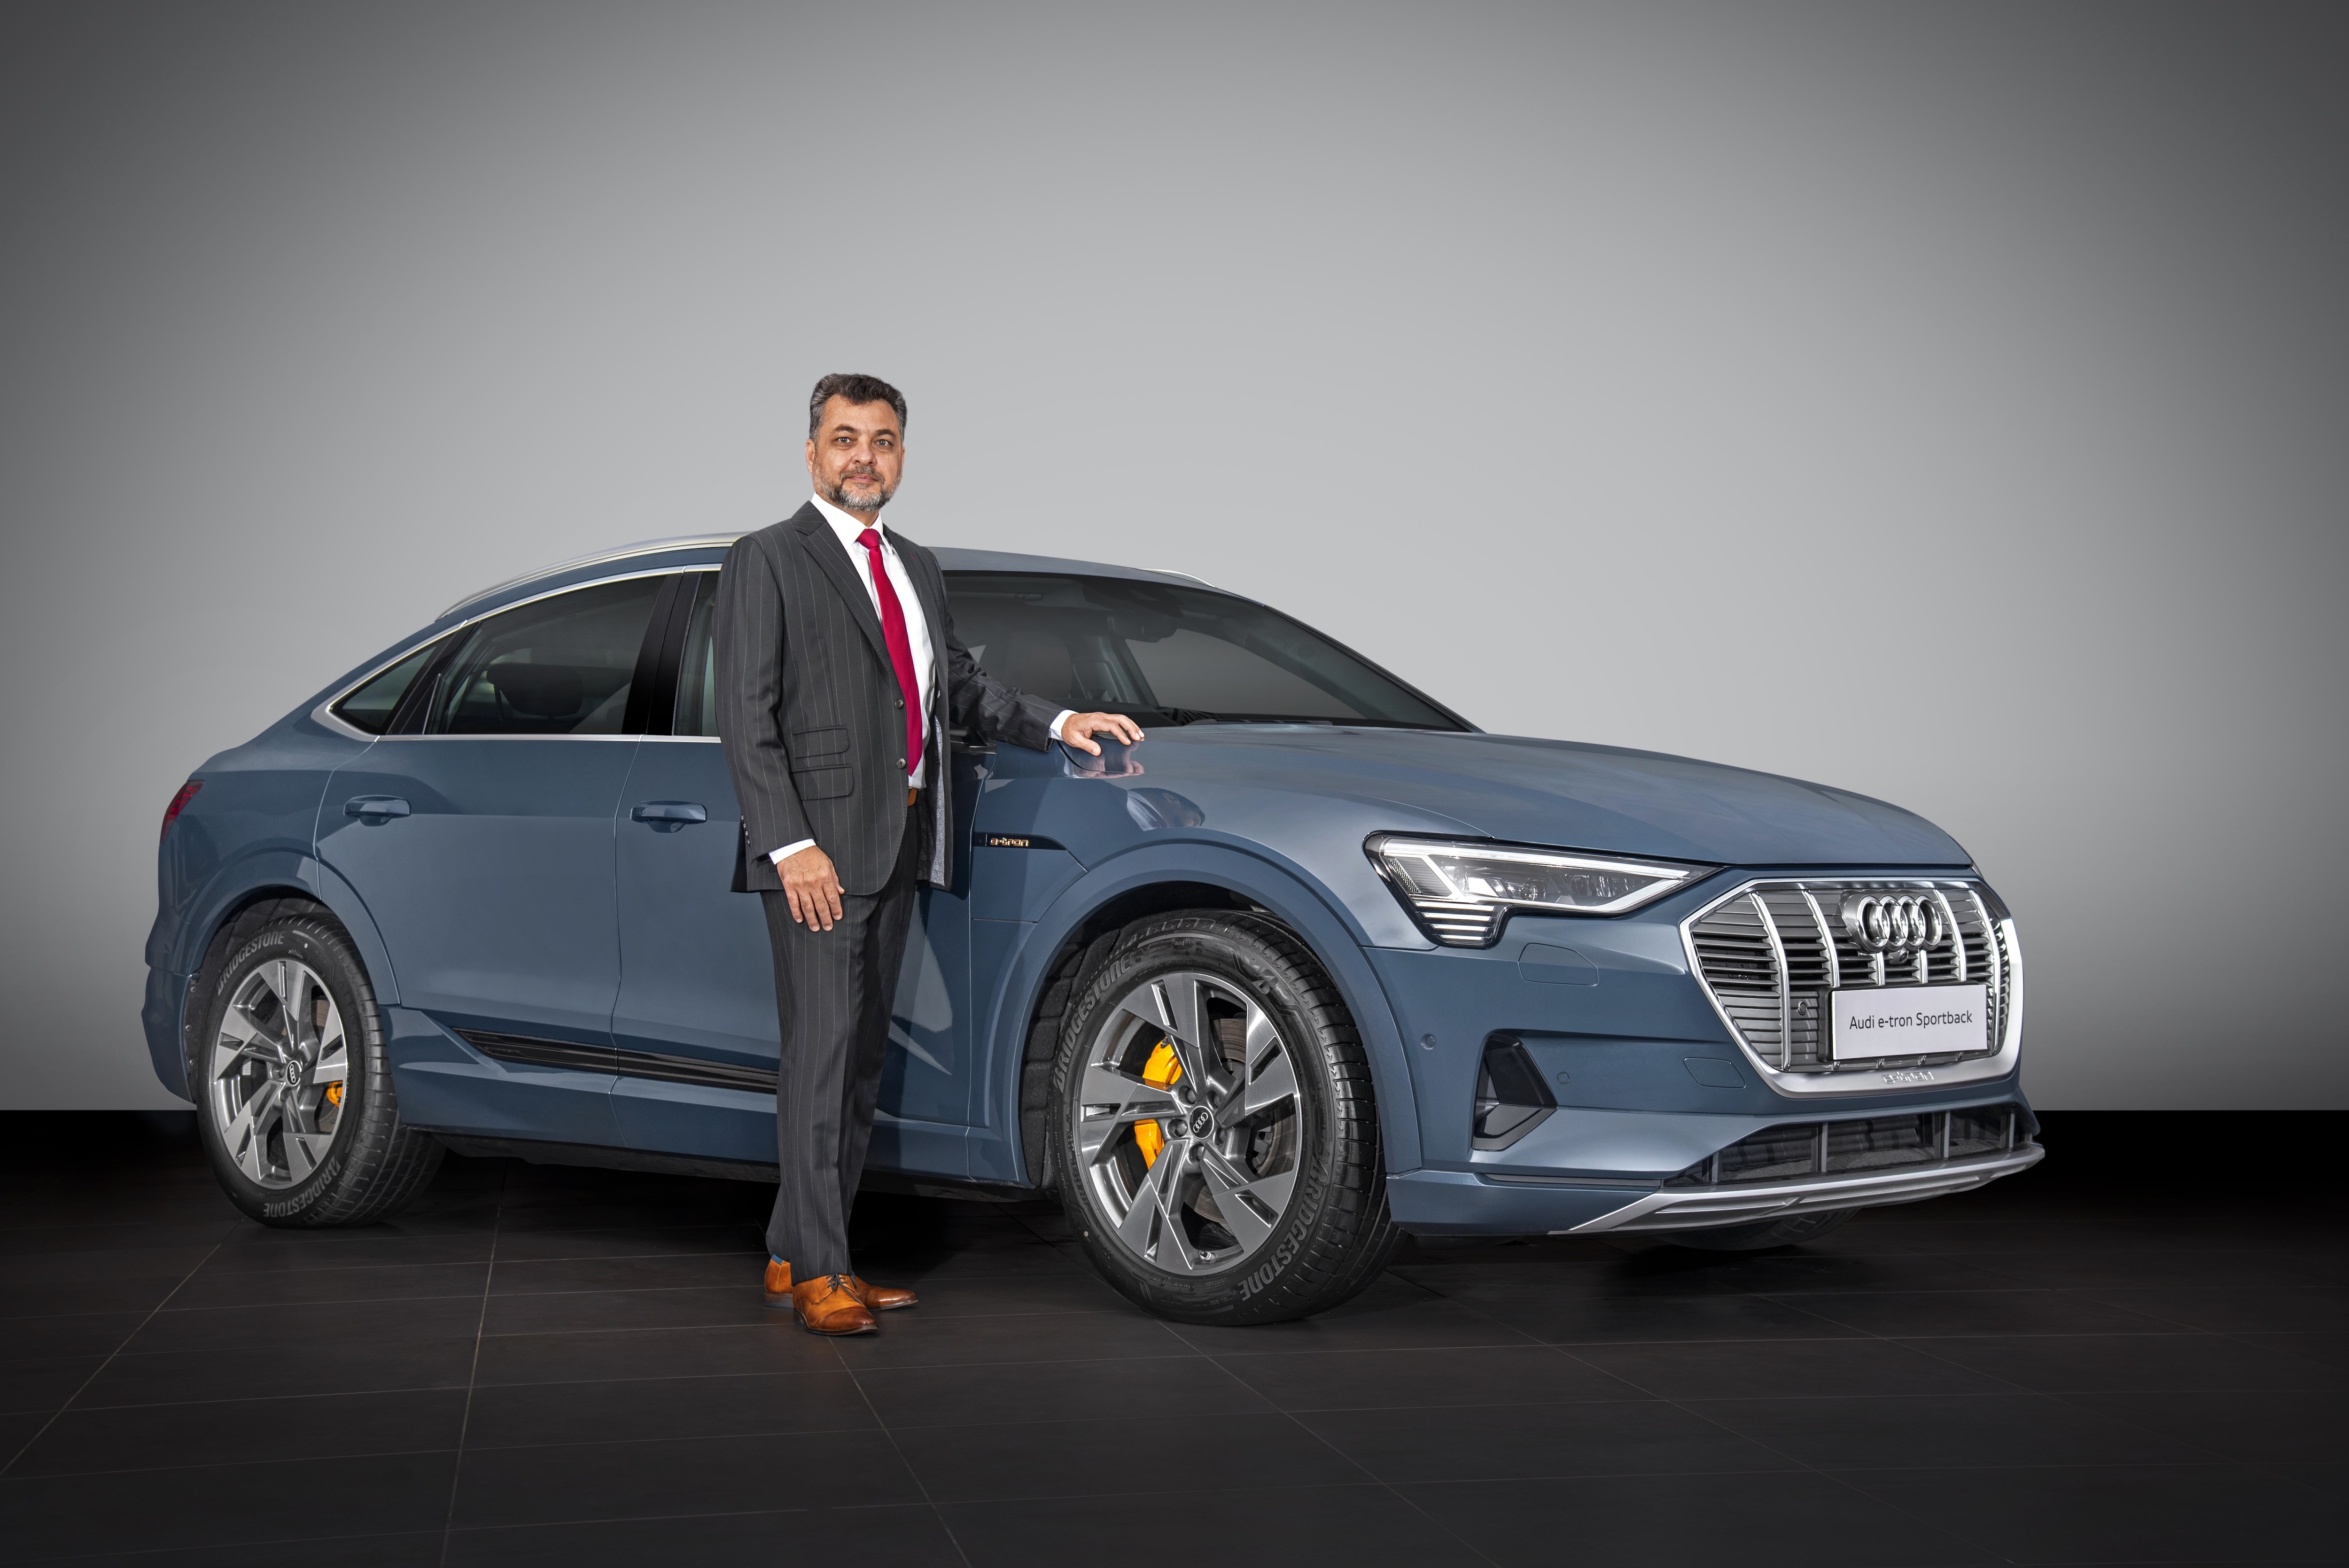 Balbir Dhillon of Audi India with the recently-launched e-tron Sportback